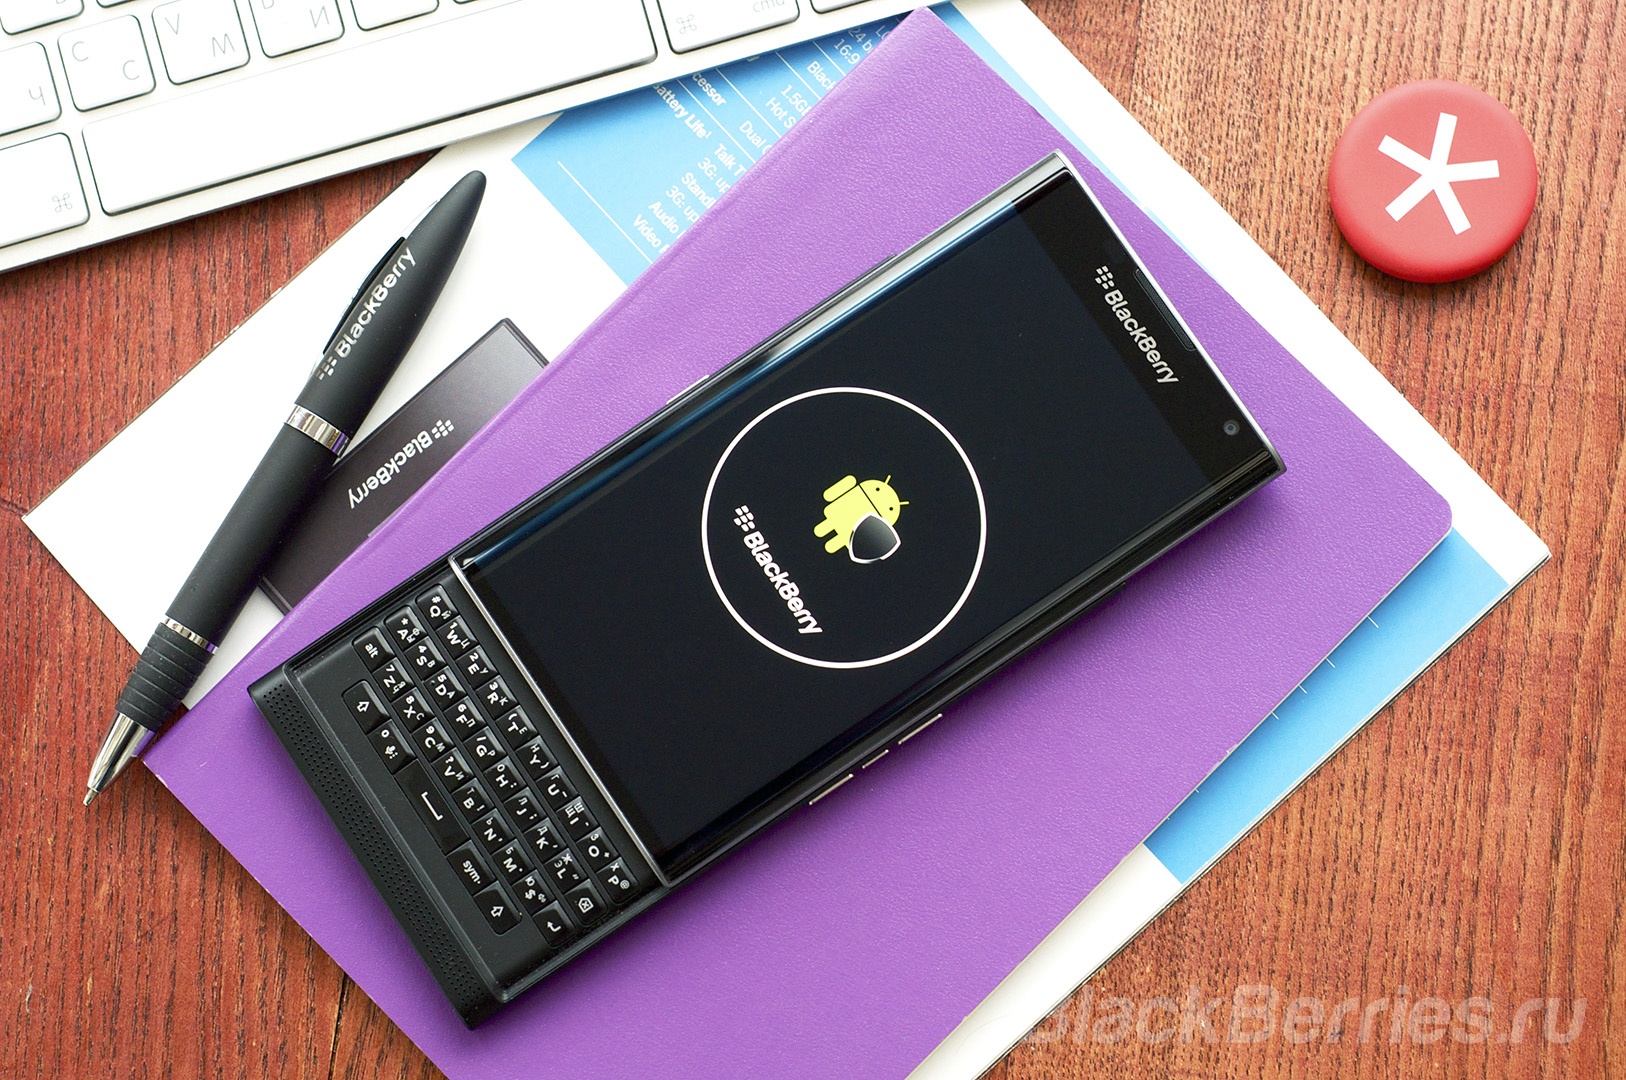 BlackBerry-Android-1